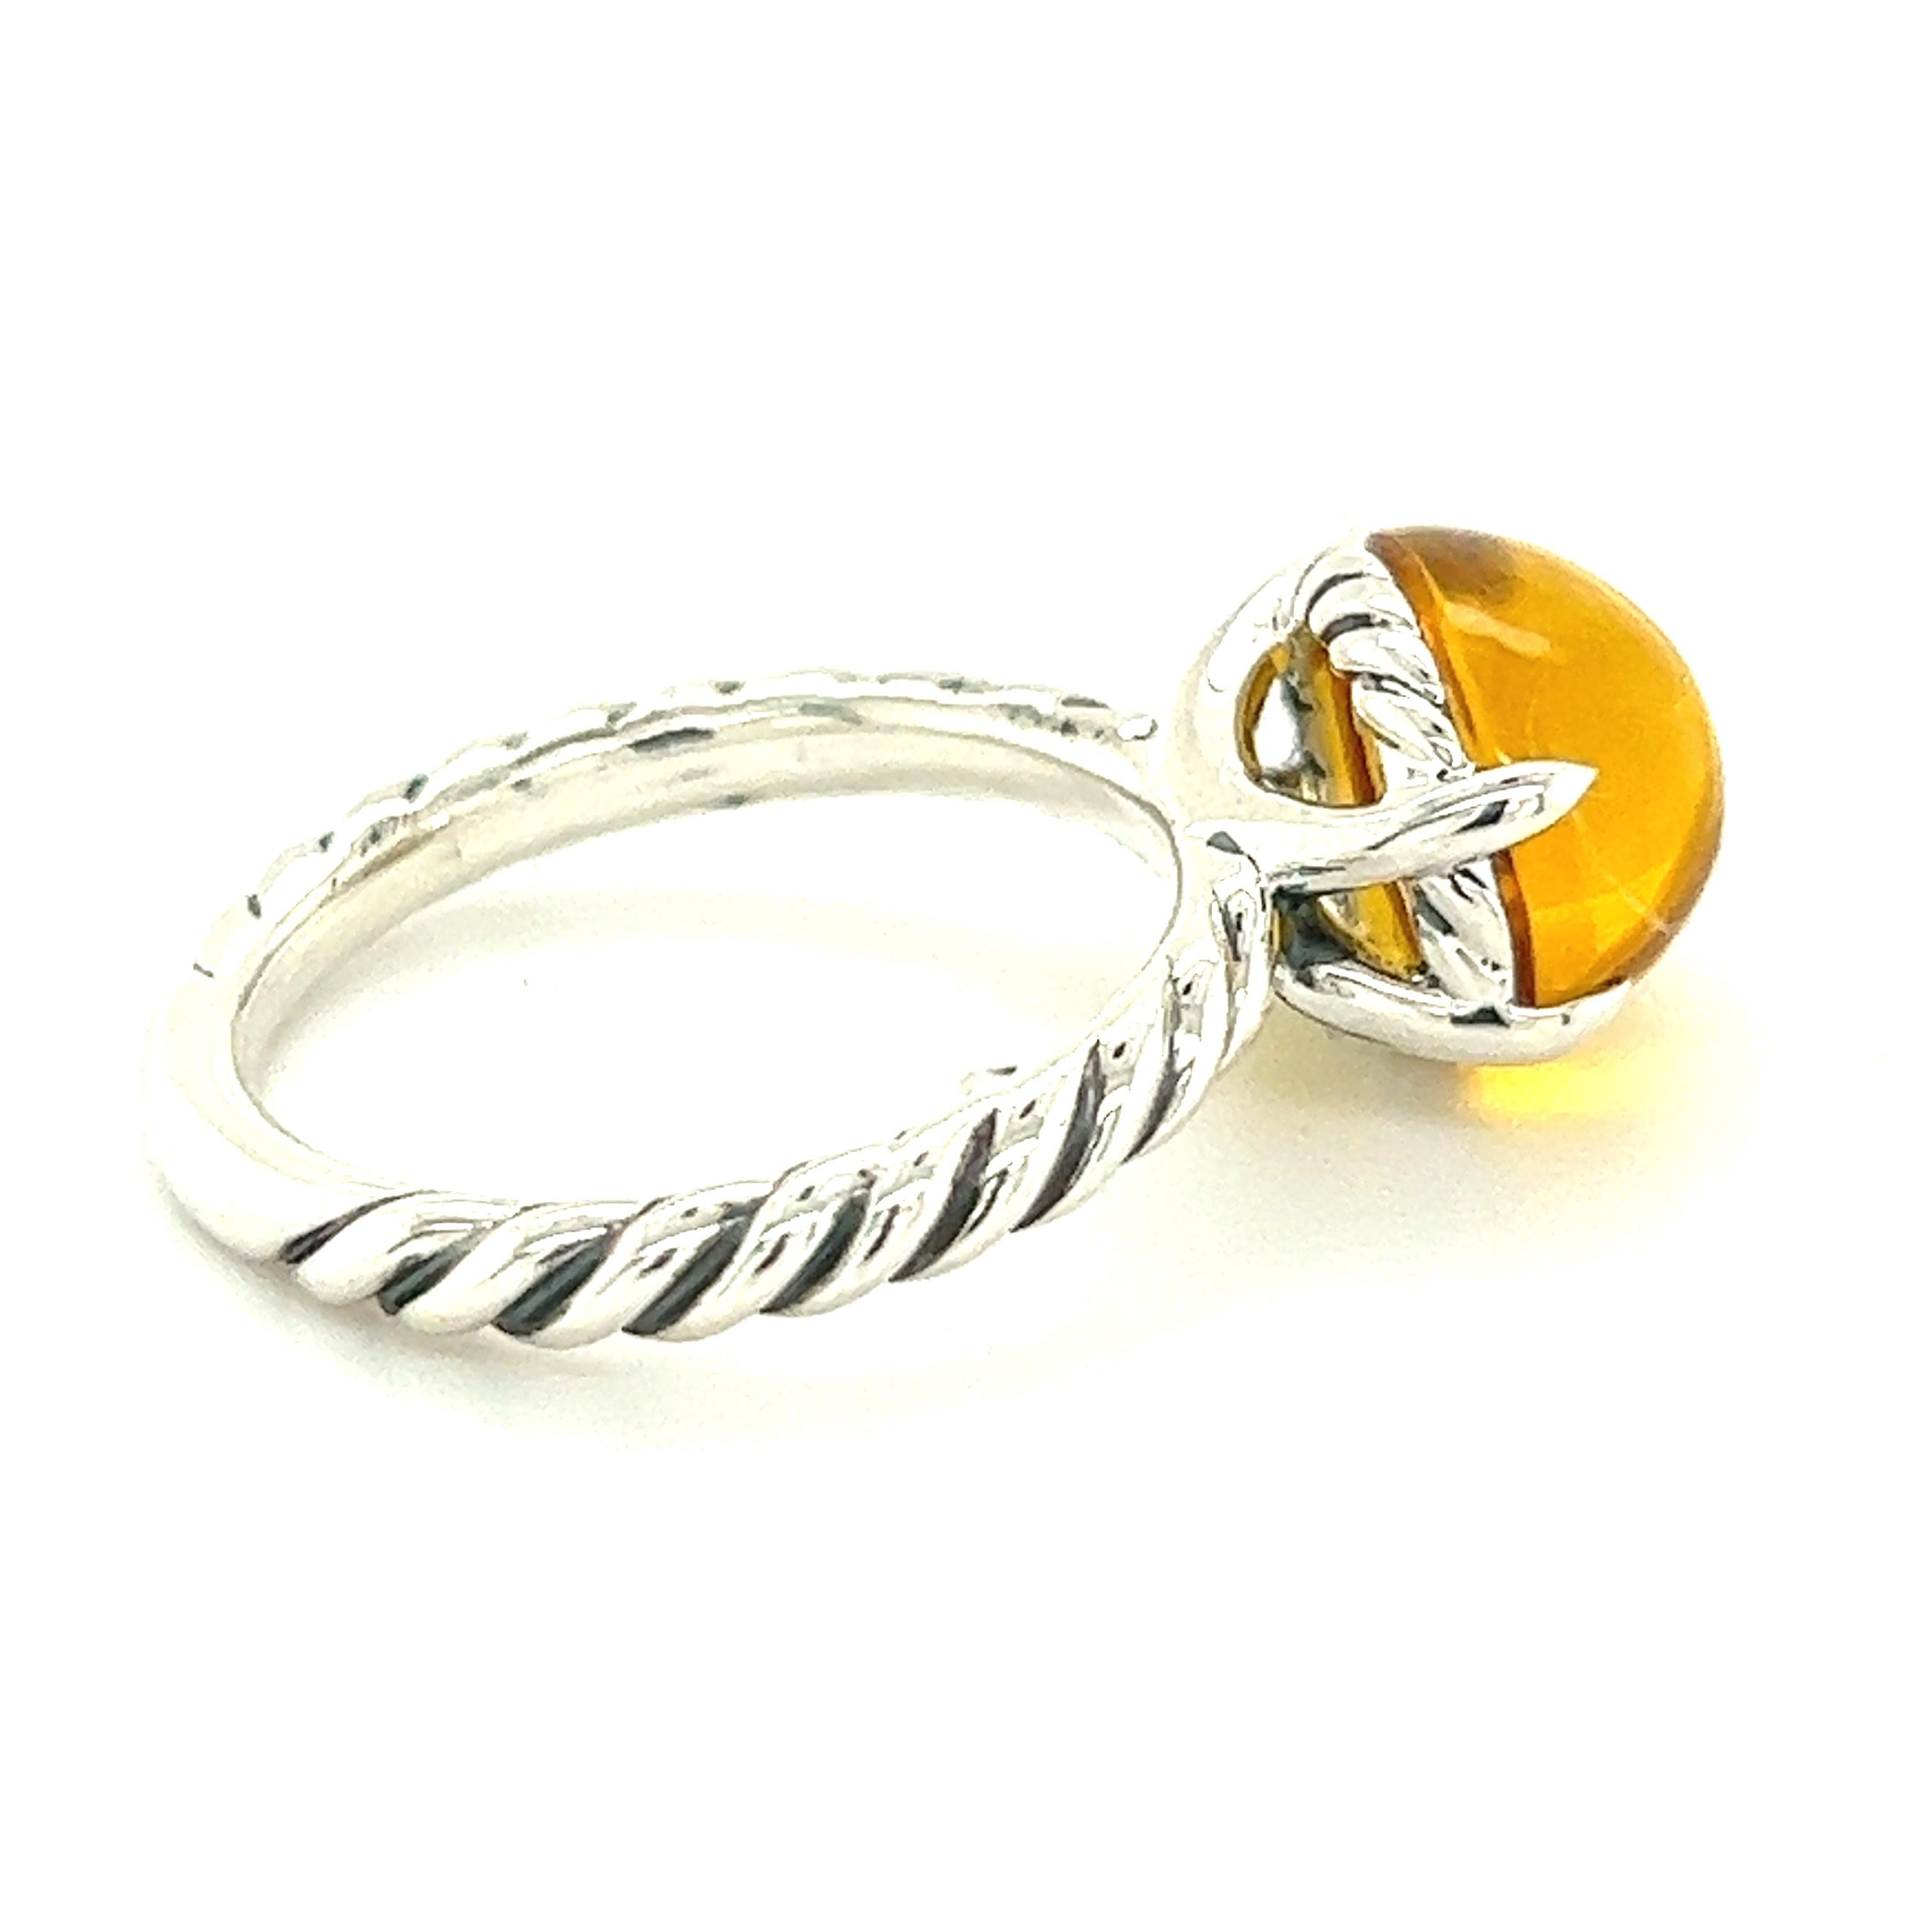 Authentic David Yurman Estate Oval Citrine Cable Ring 6.5 Silver DY278

Retail: $799.00

This elegant Authentic David Yurman ring is made of sterling silver and has a weight of 4.6 grams.

TRUSTED SELLER SINCE 2002

PLEASE SEE OUR HUNDREDS OF